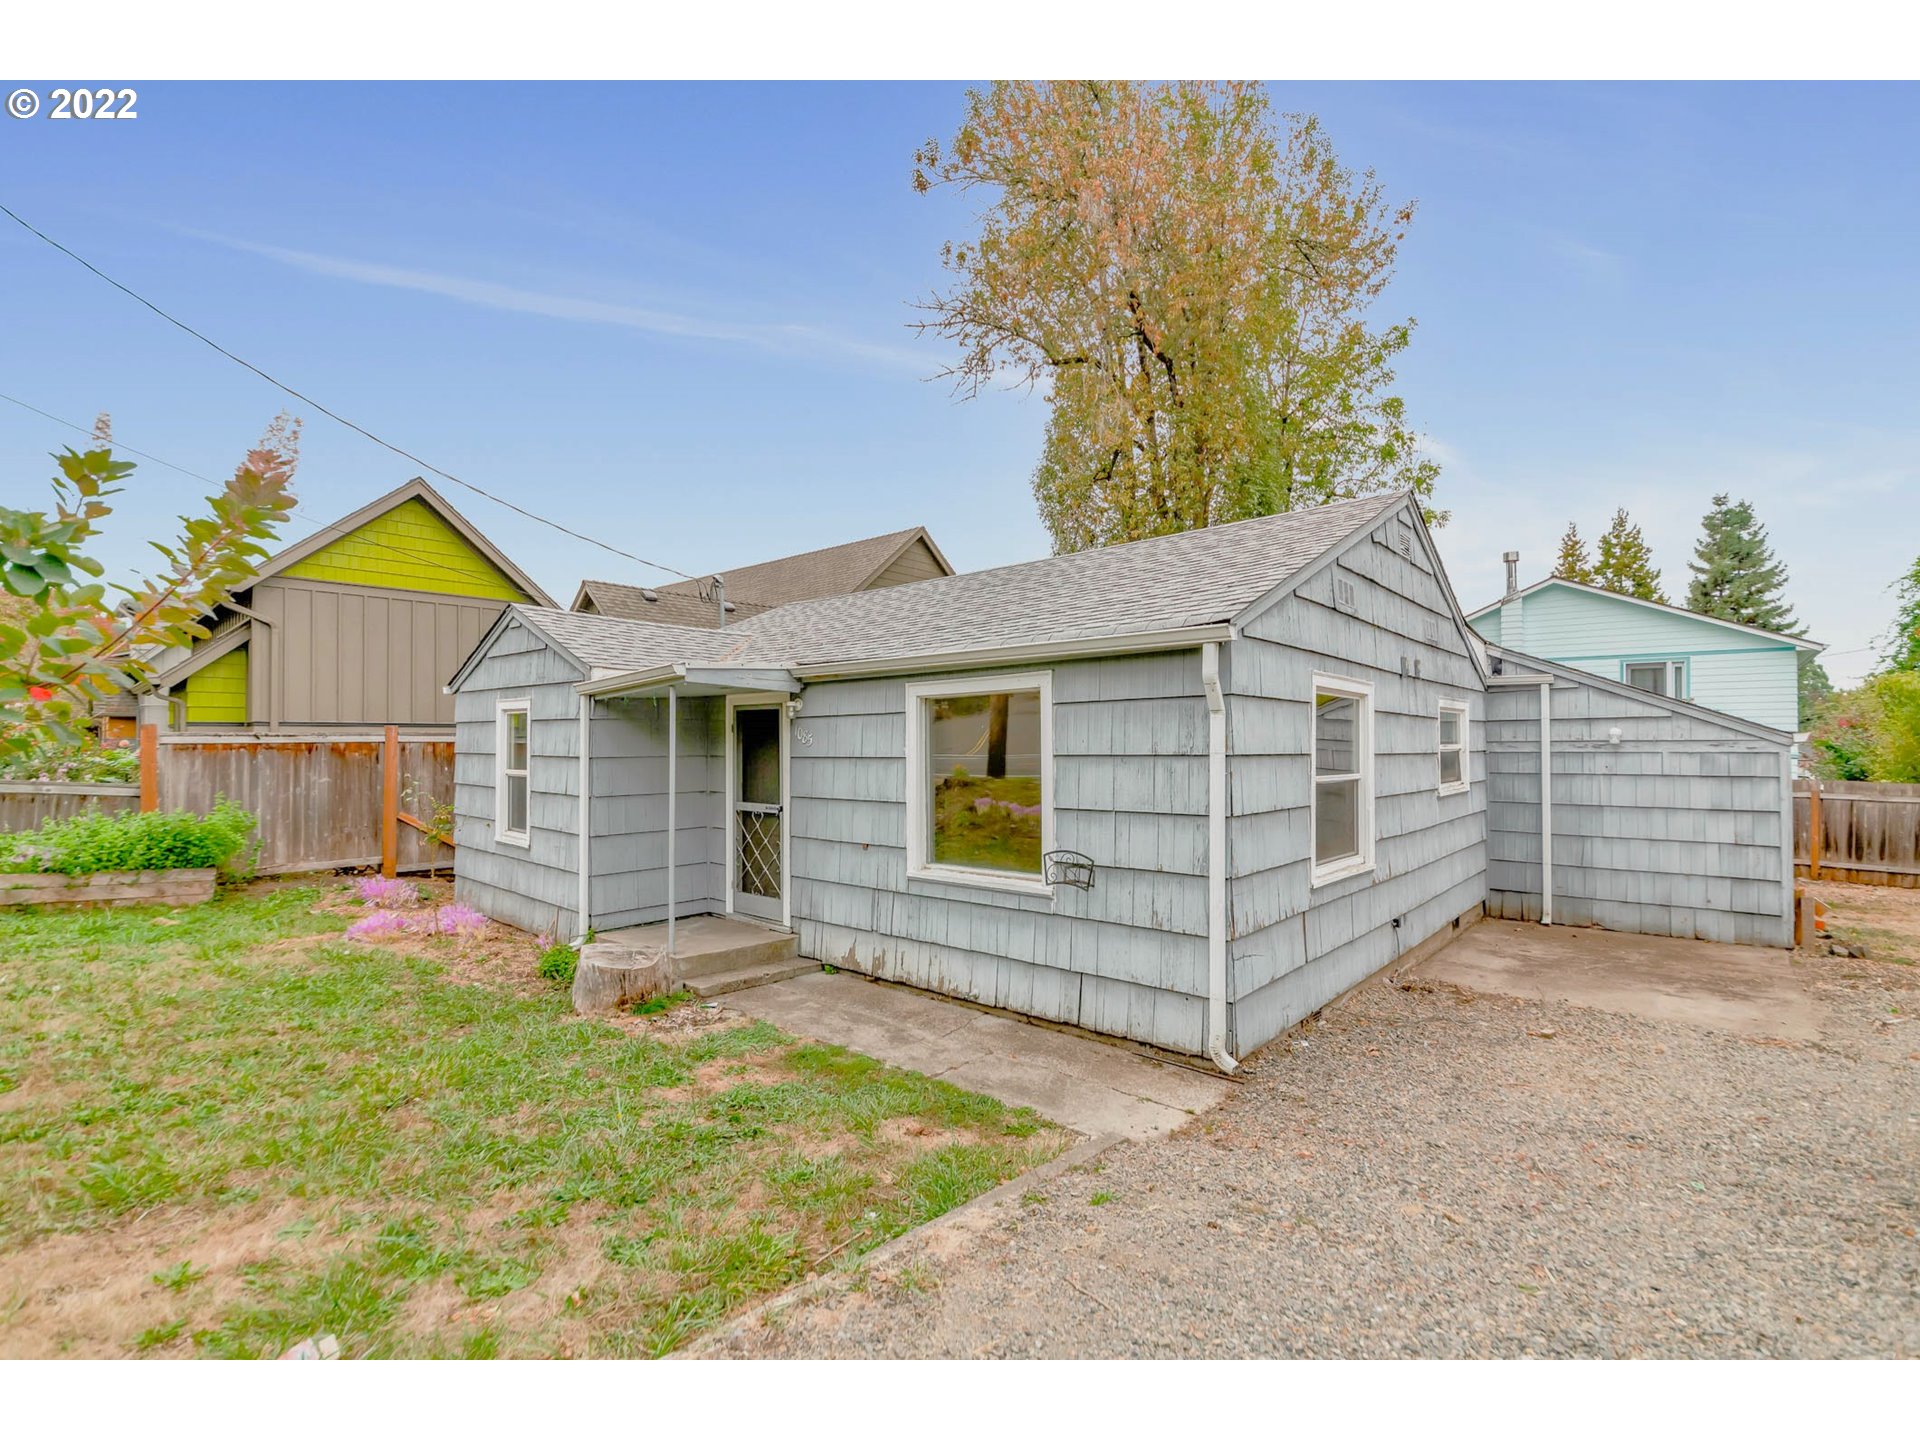 1085 W 28TH AVE, Eugene, OR 97405